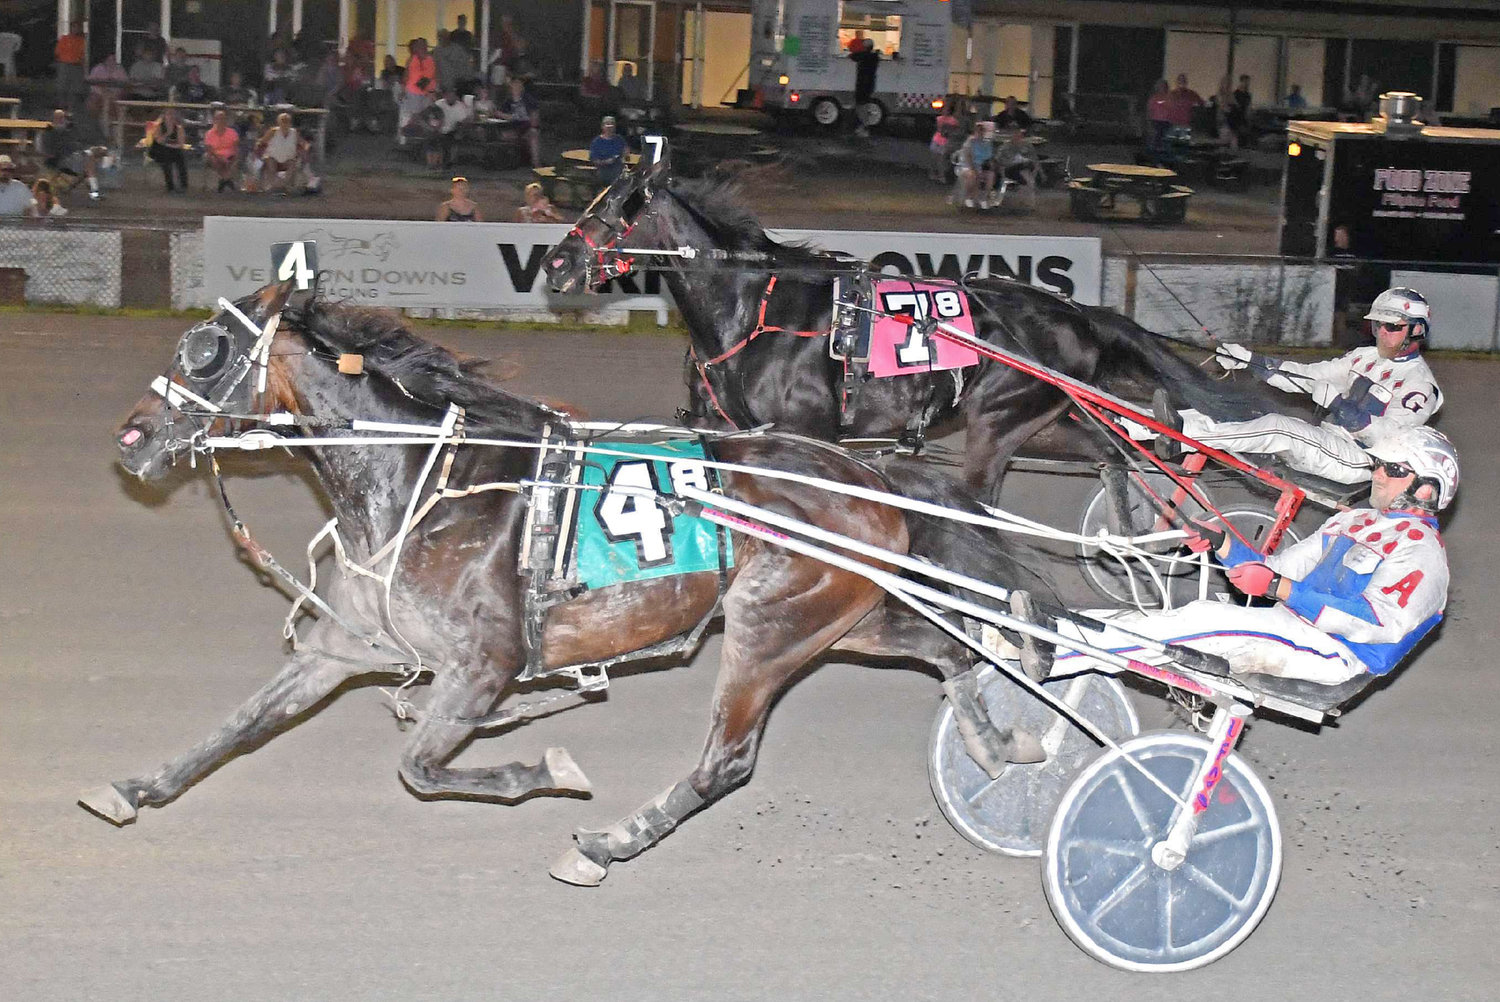 Spoiler Alert and driver Frank Affrunti were upset winners in the featured $7,900 Open Trot at Vernon Downs on Saturday. With a late, charge they won in a seasonal best of 1:55.1. It was Spoiler Alert's fourth win this season. He now has 25 career victories.